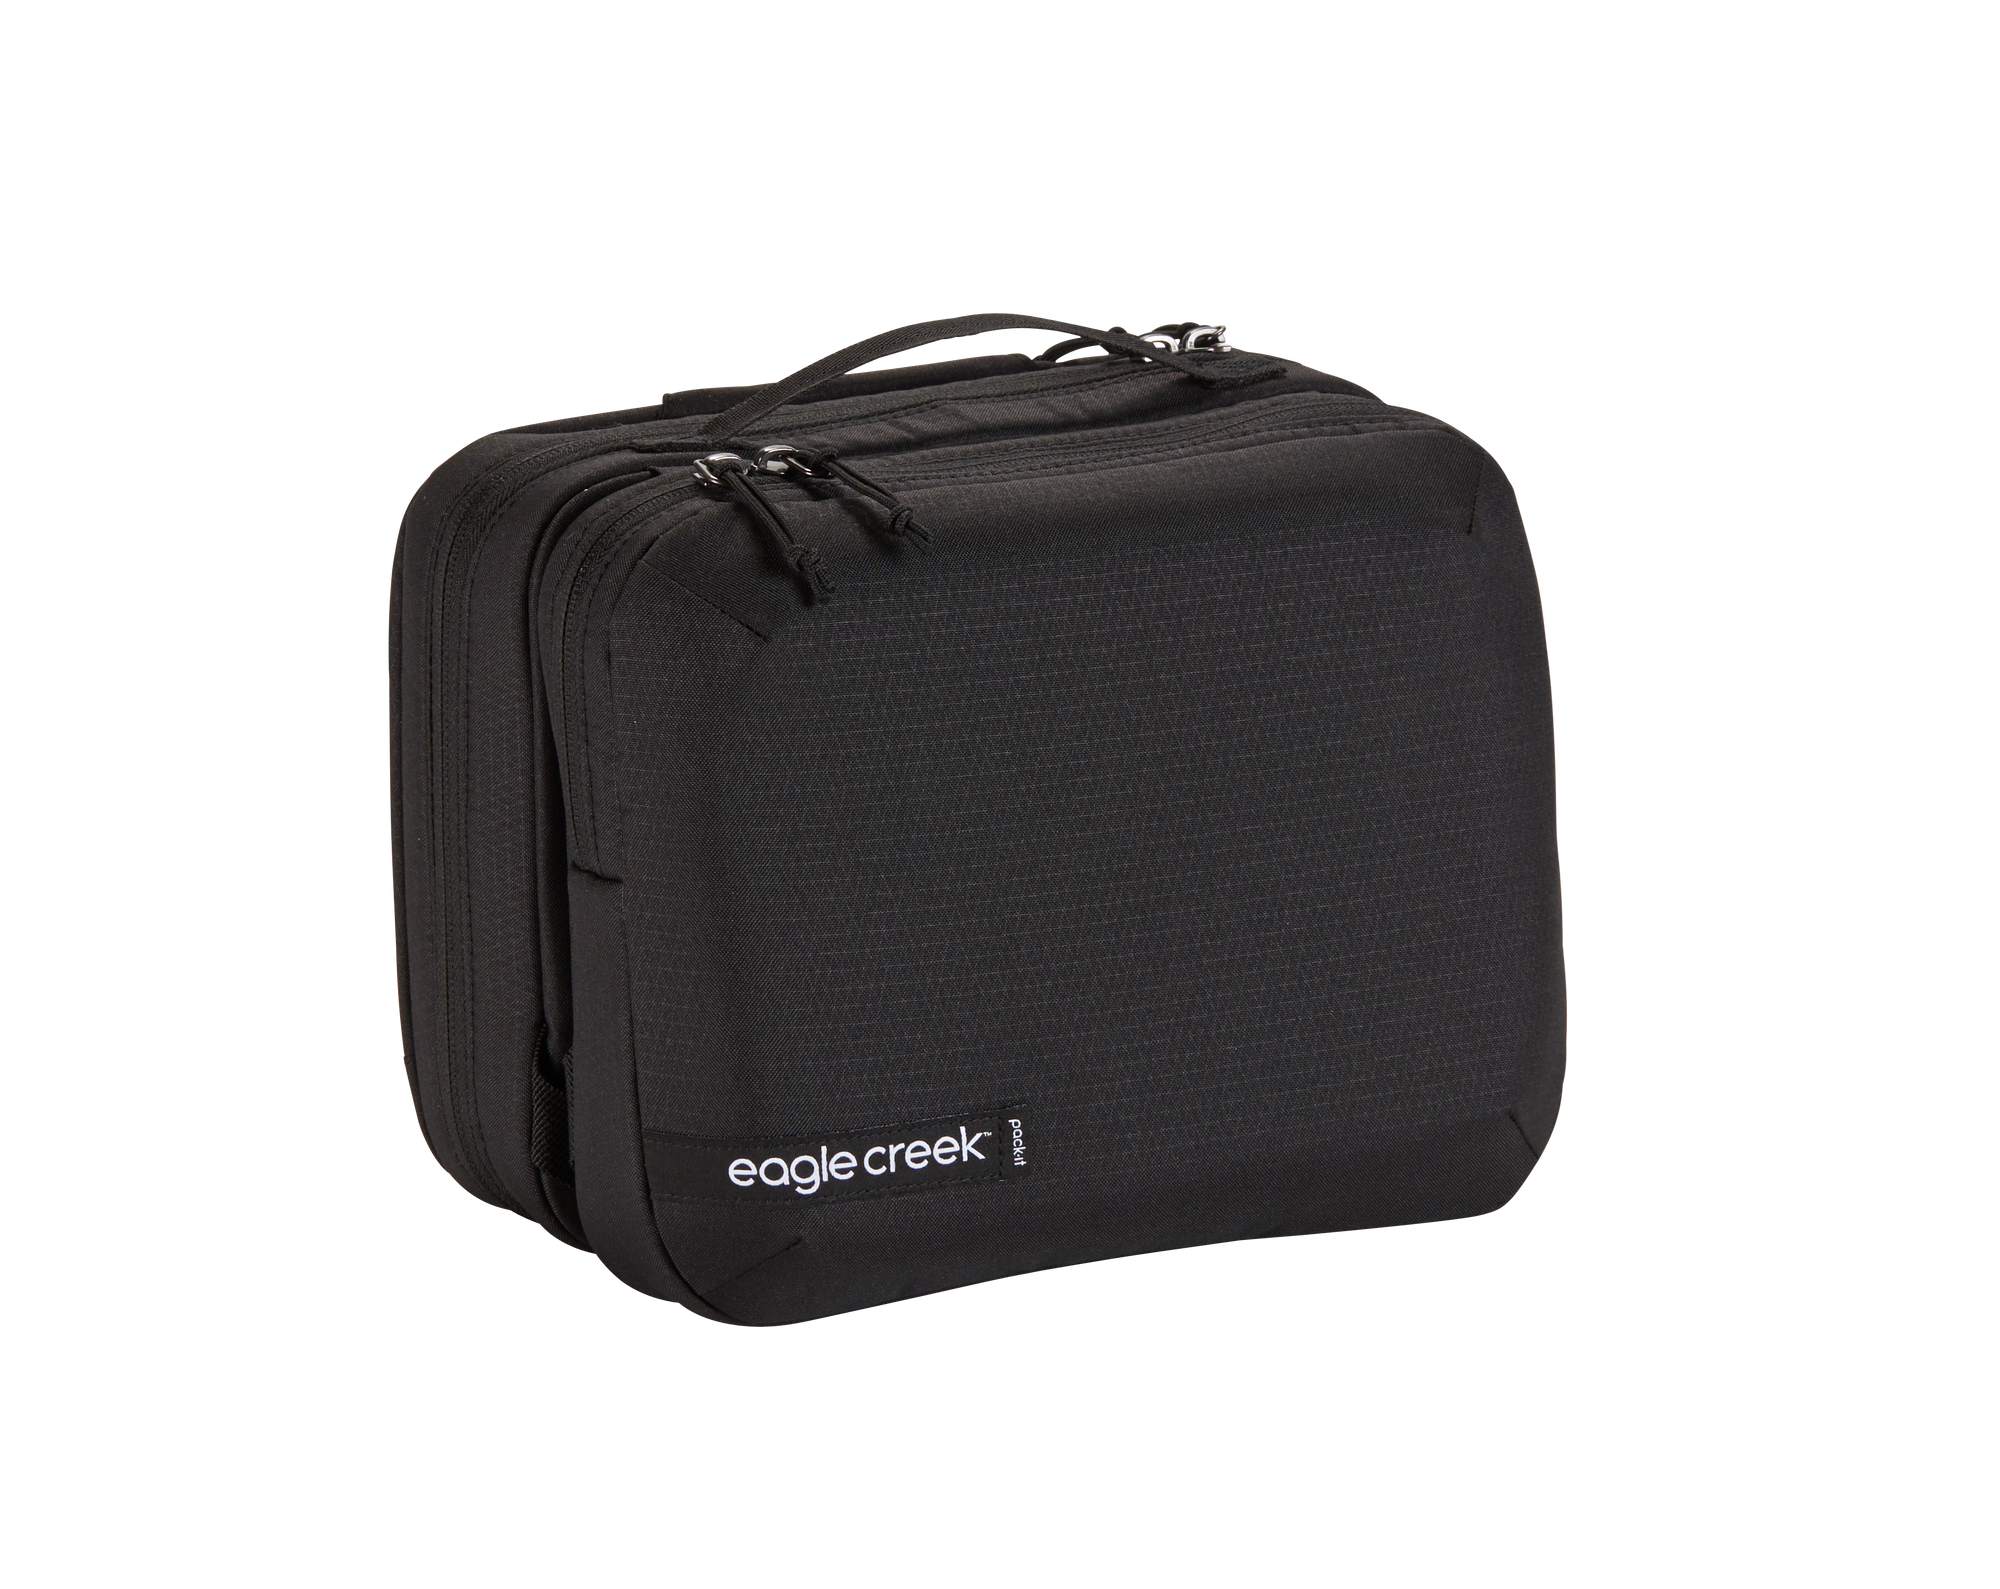 PACK-IT REVEAL TRIFOLD TOILETRY KIT - BLACK